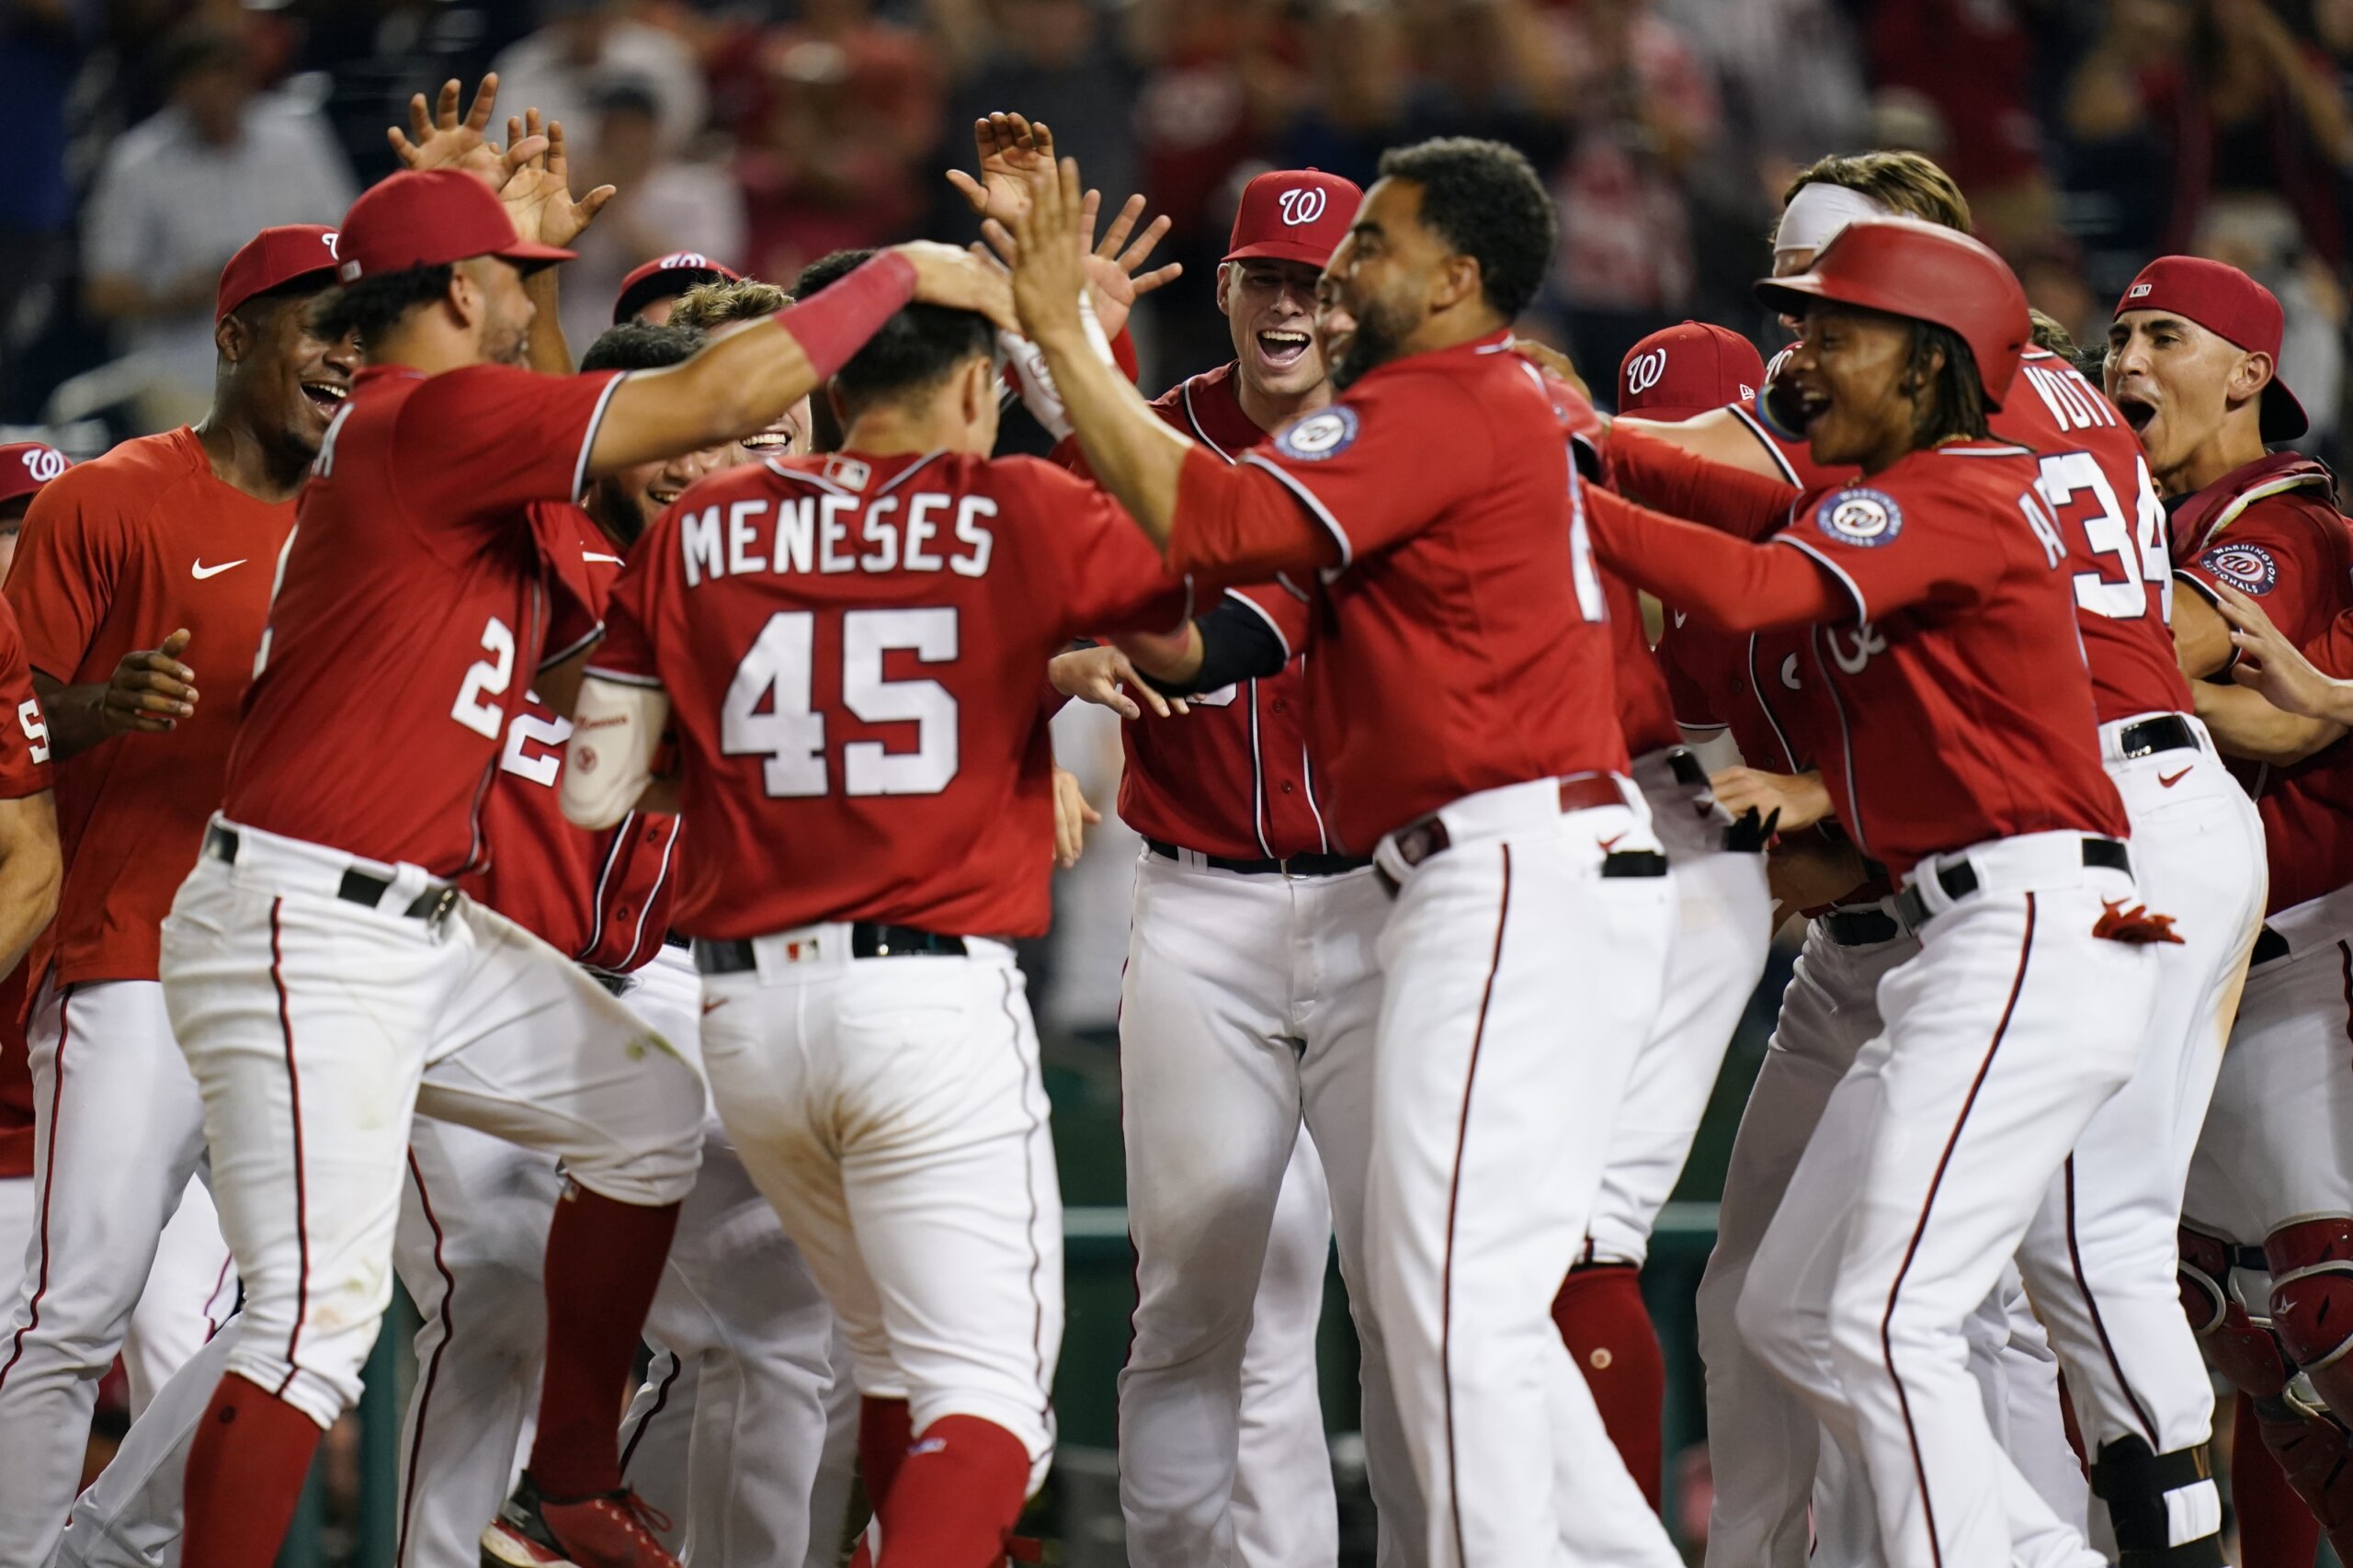 30-year-old Nationals rookie Joey Meneses hits HR in MLB debut